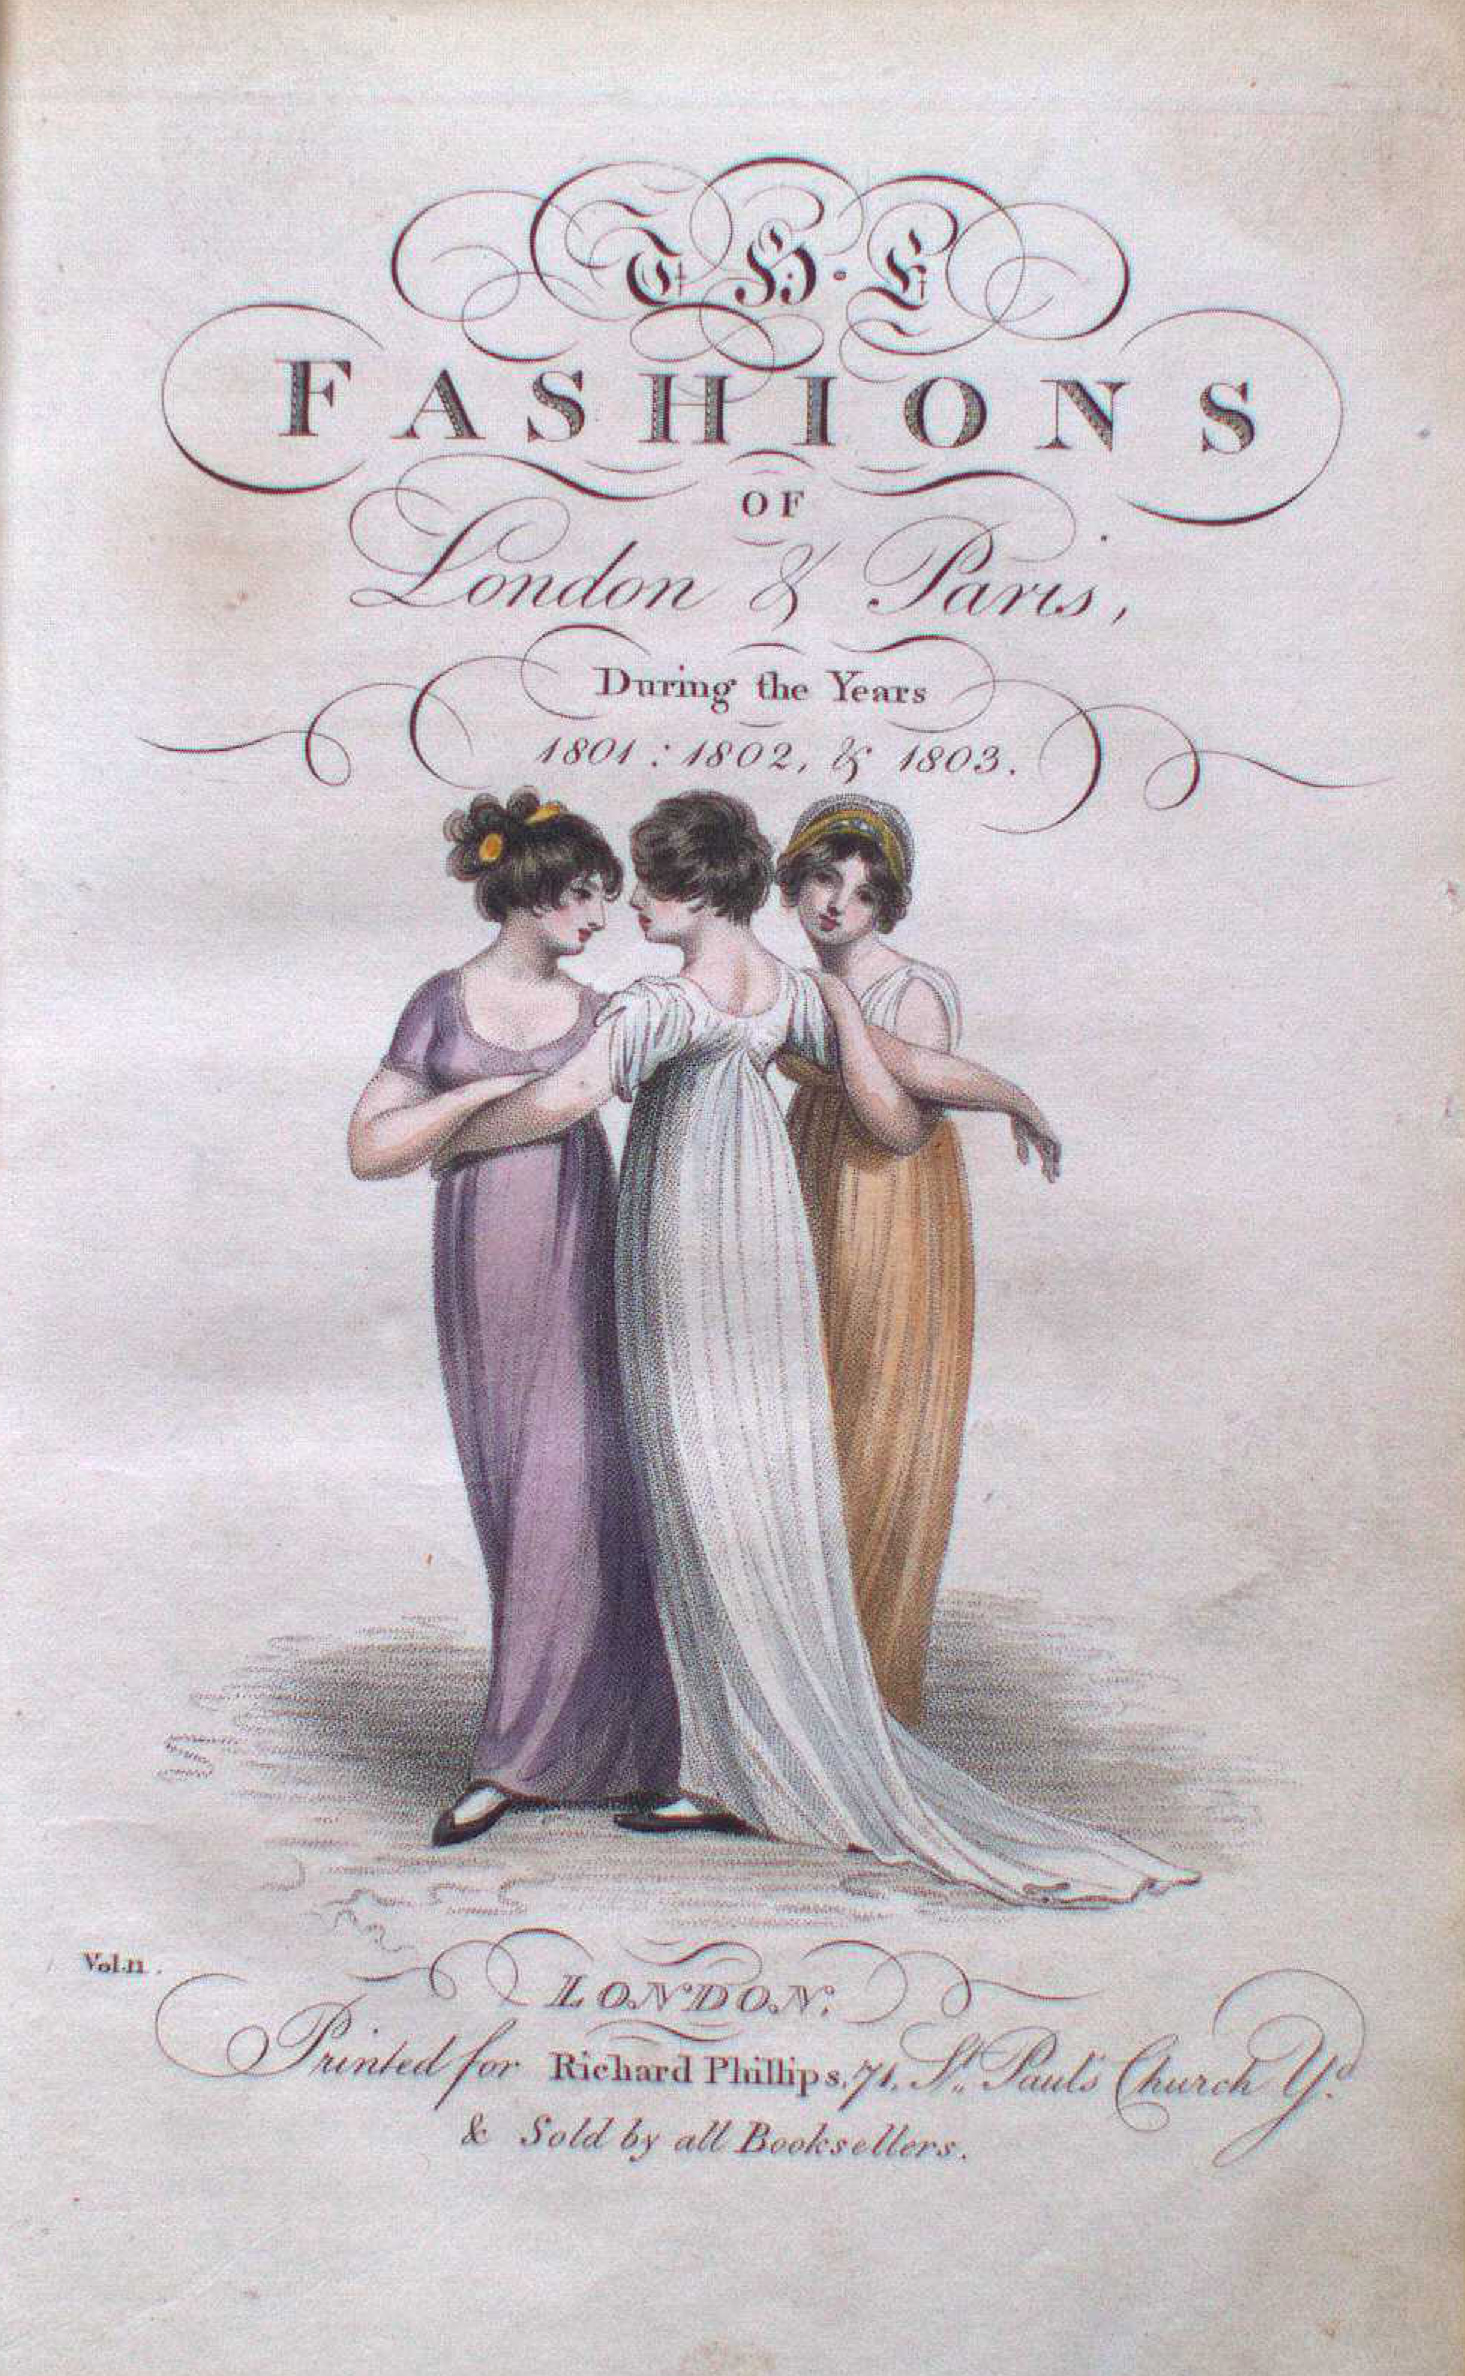 Fashions of London and Paris, title page